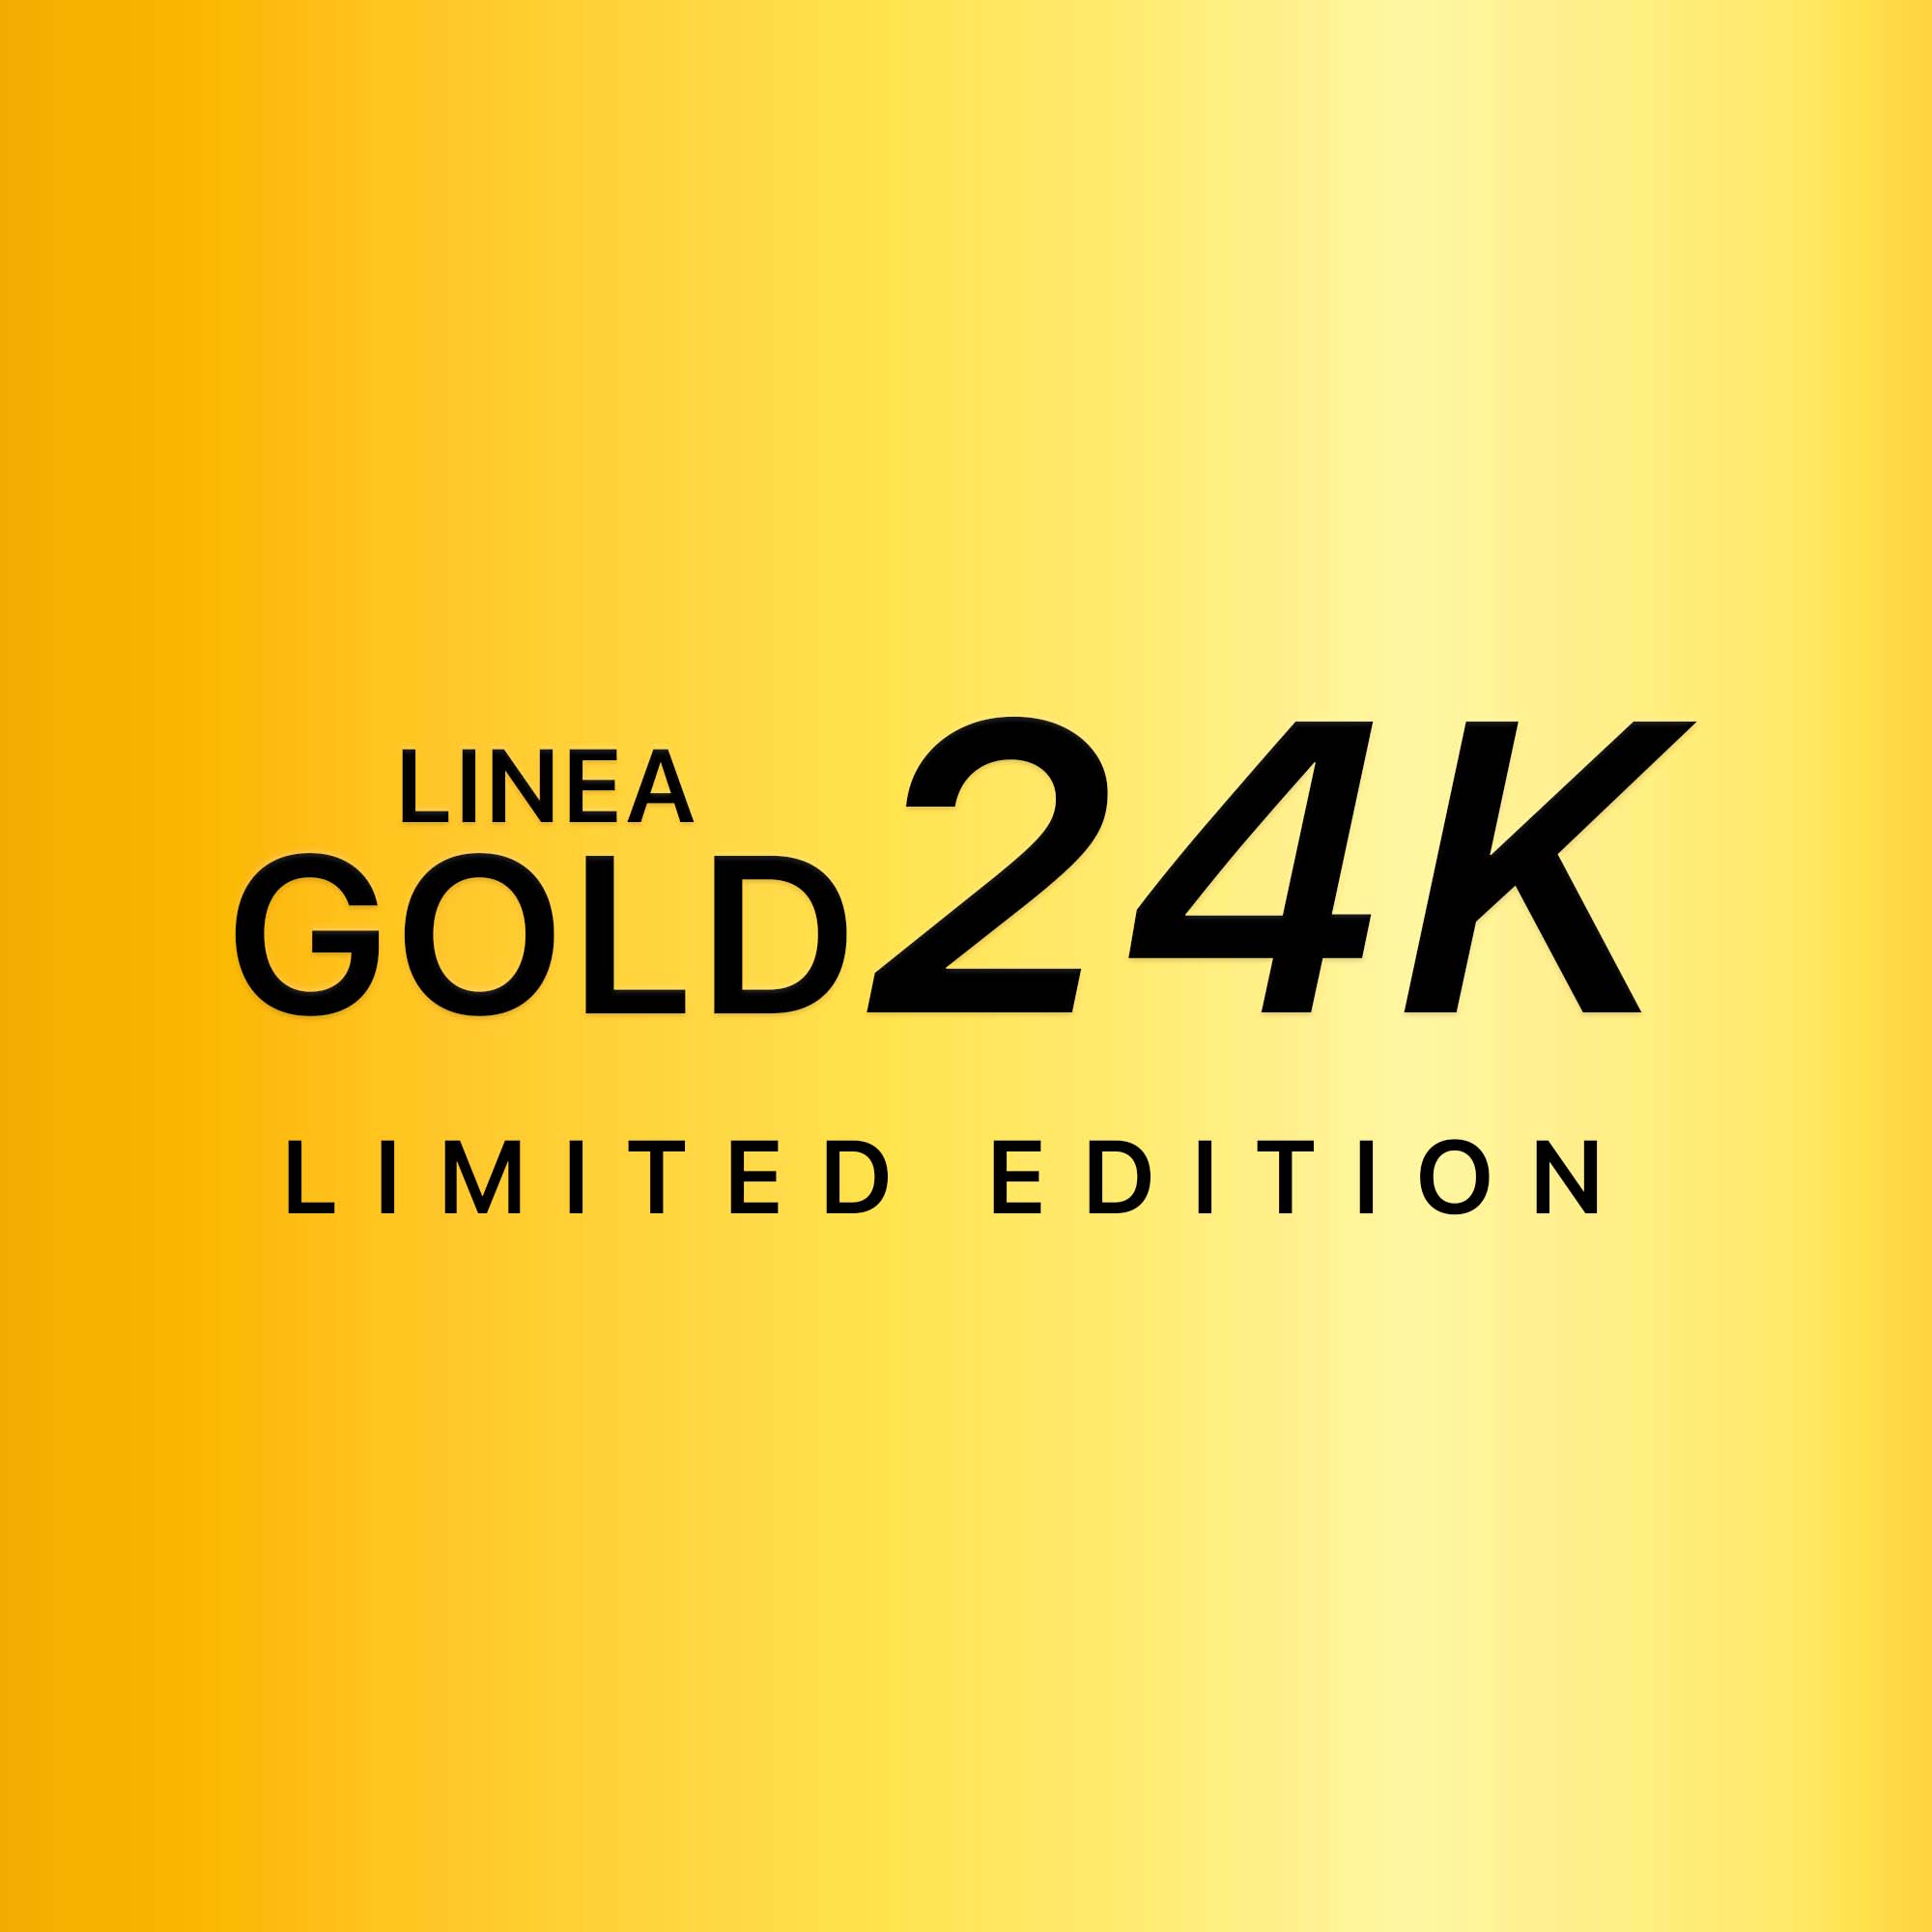 Linea Gold 24K - Limited Edition